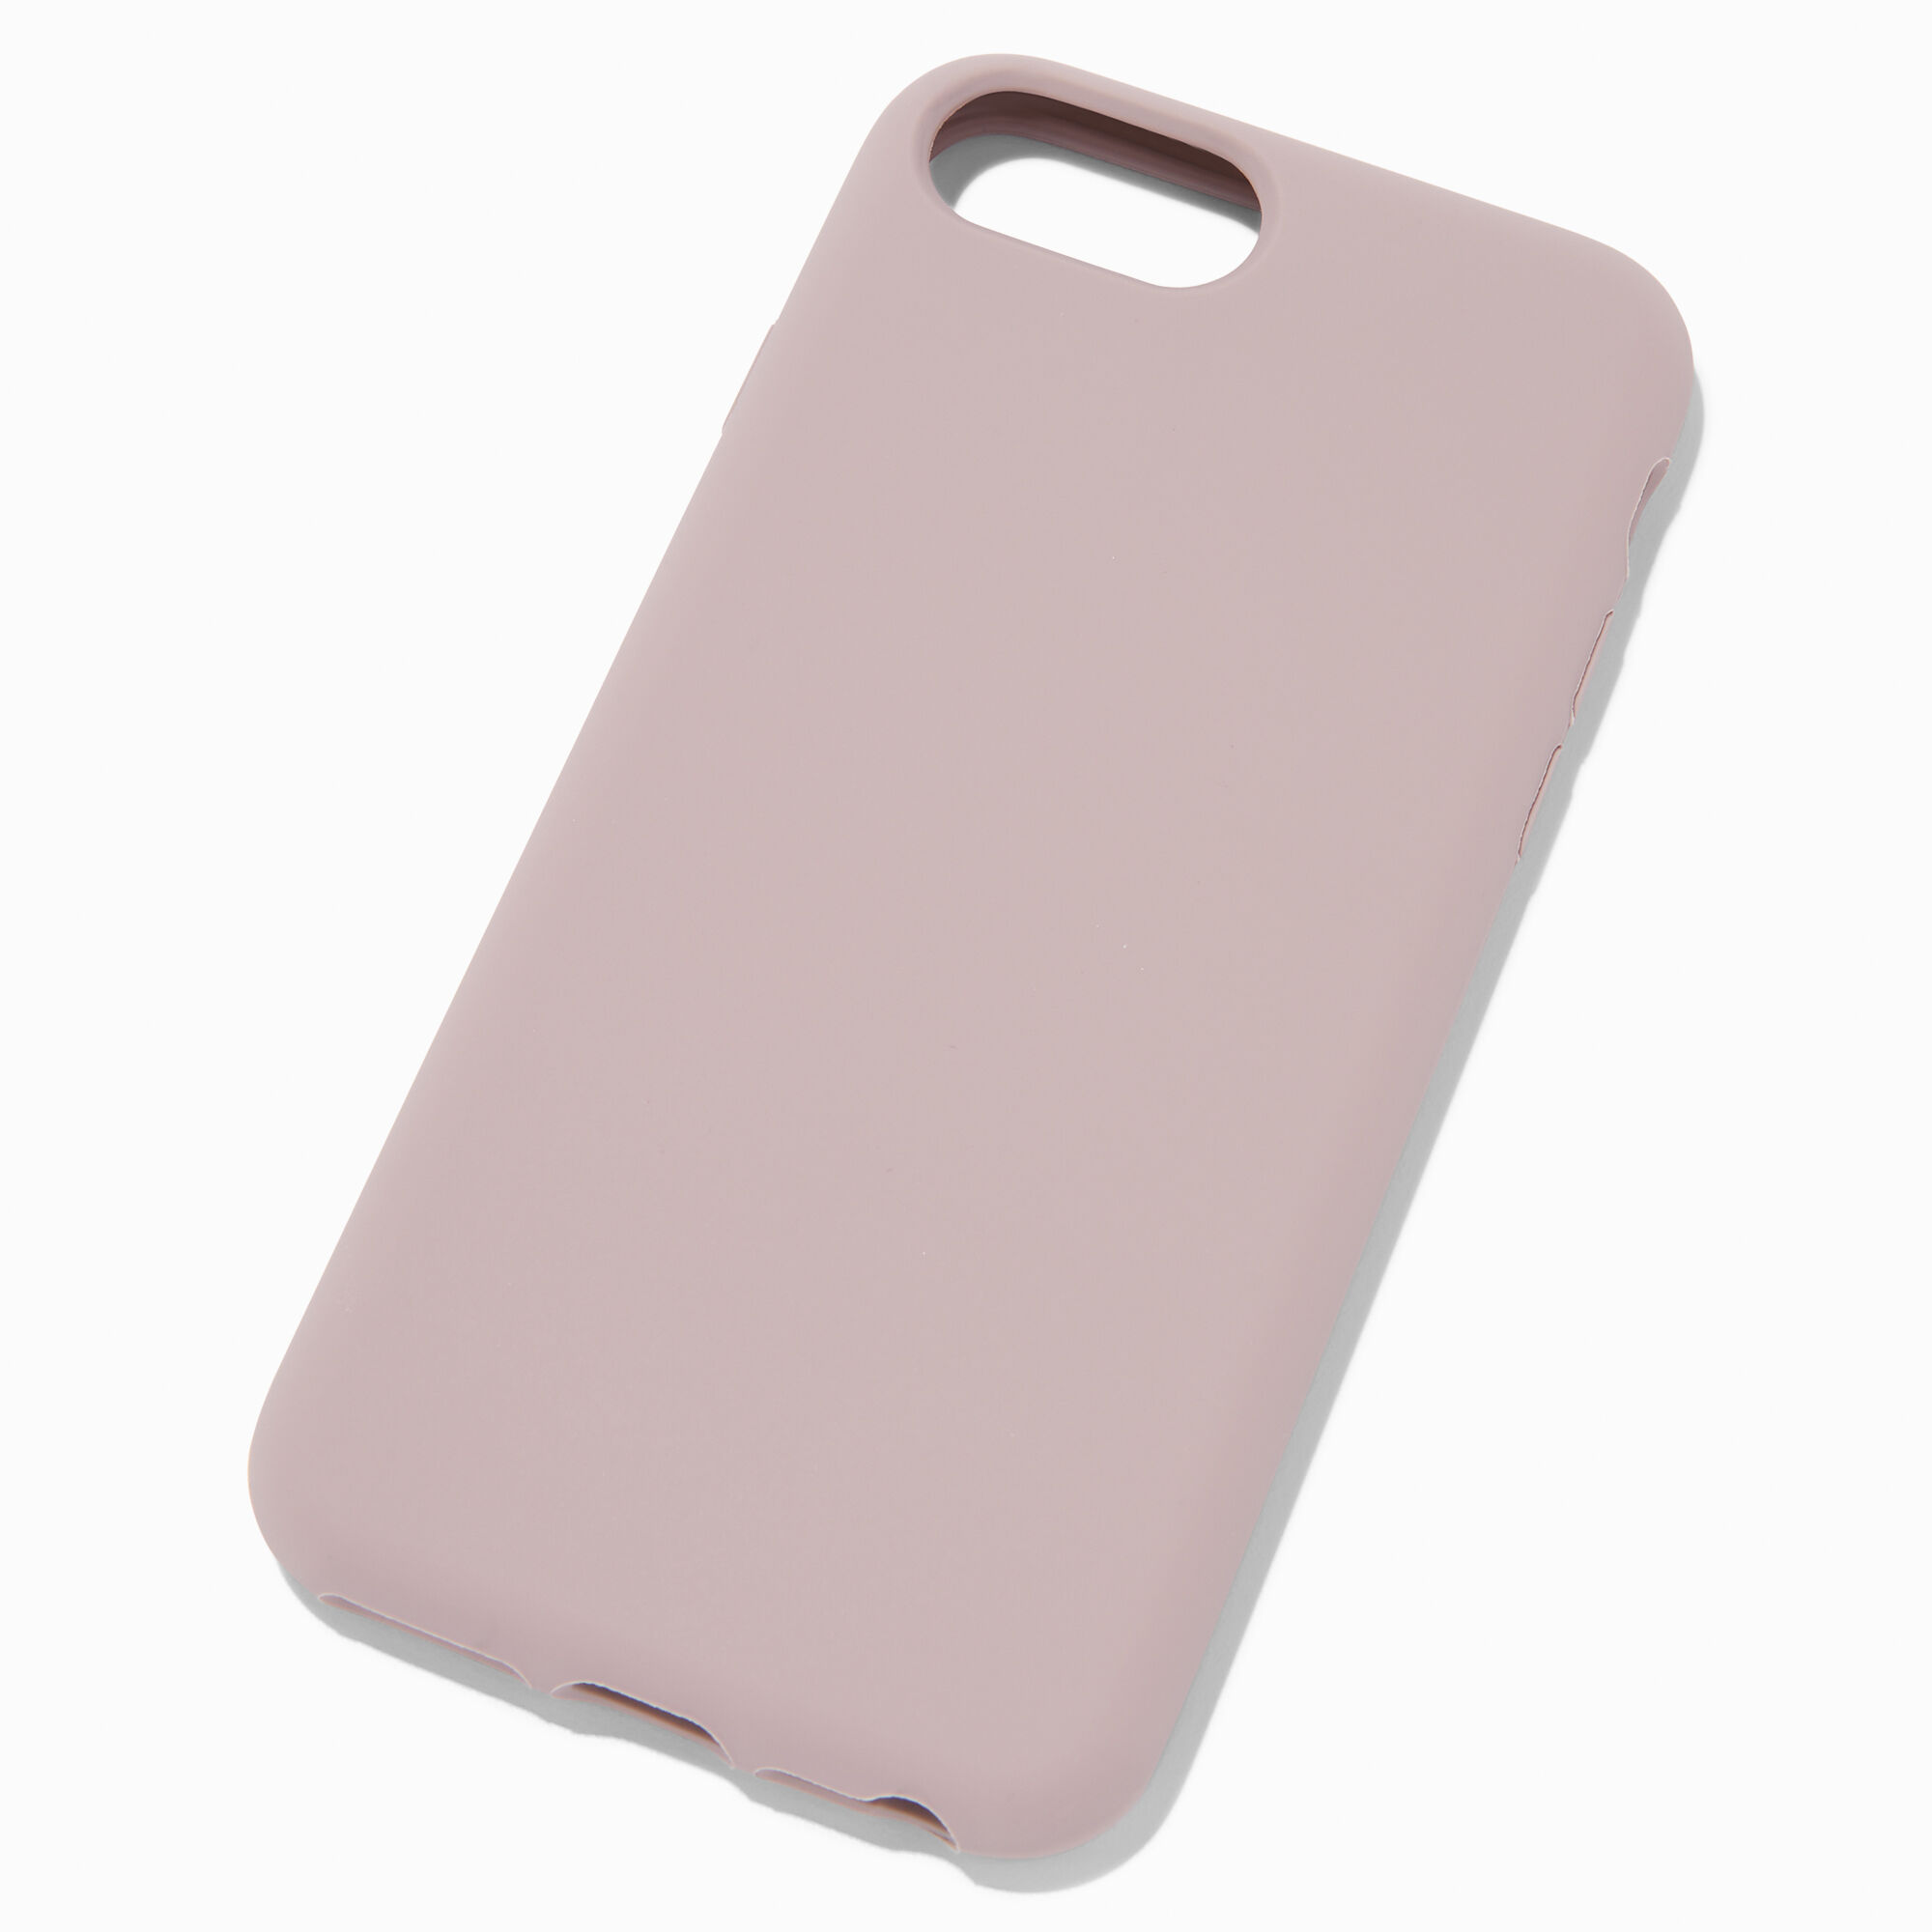 View Claires Solid Silicone Phone Case Fits Iphone 678 Se Mauve information